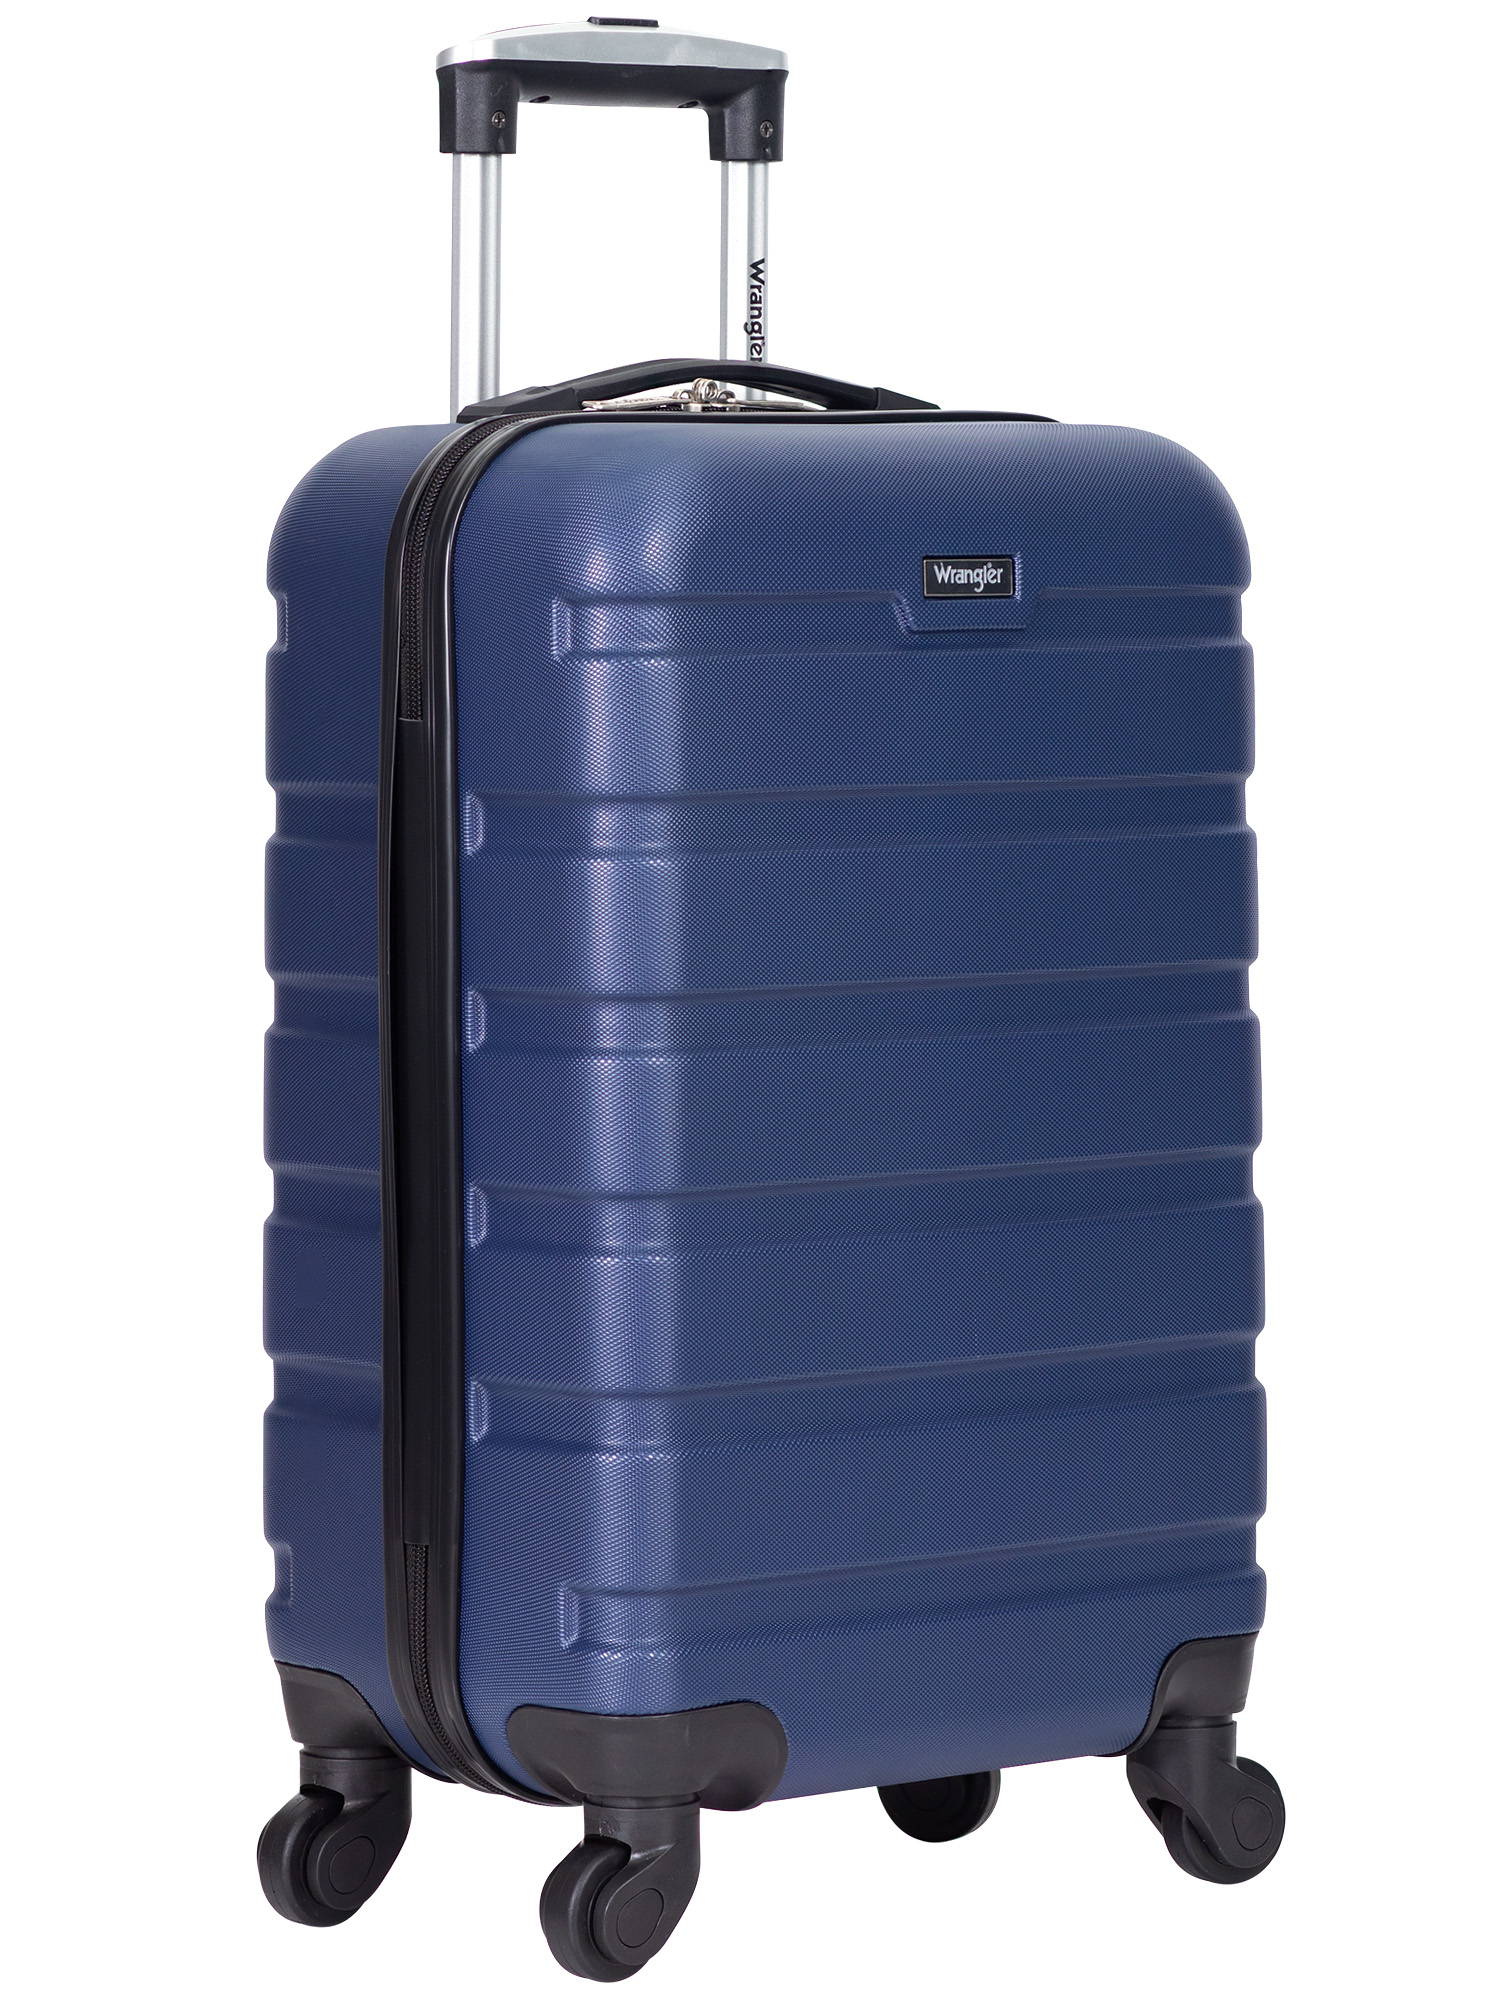 Wrangler 20” Carry-On Rolling Hard side Spinner Luggage - Navy - image 4 of 7